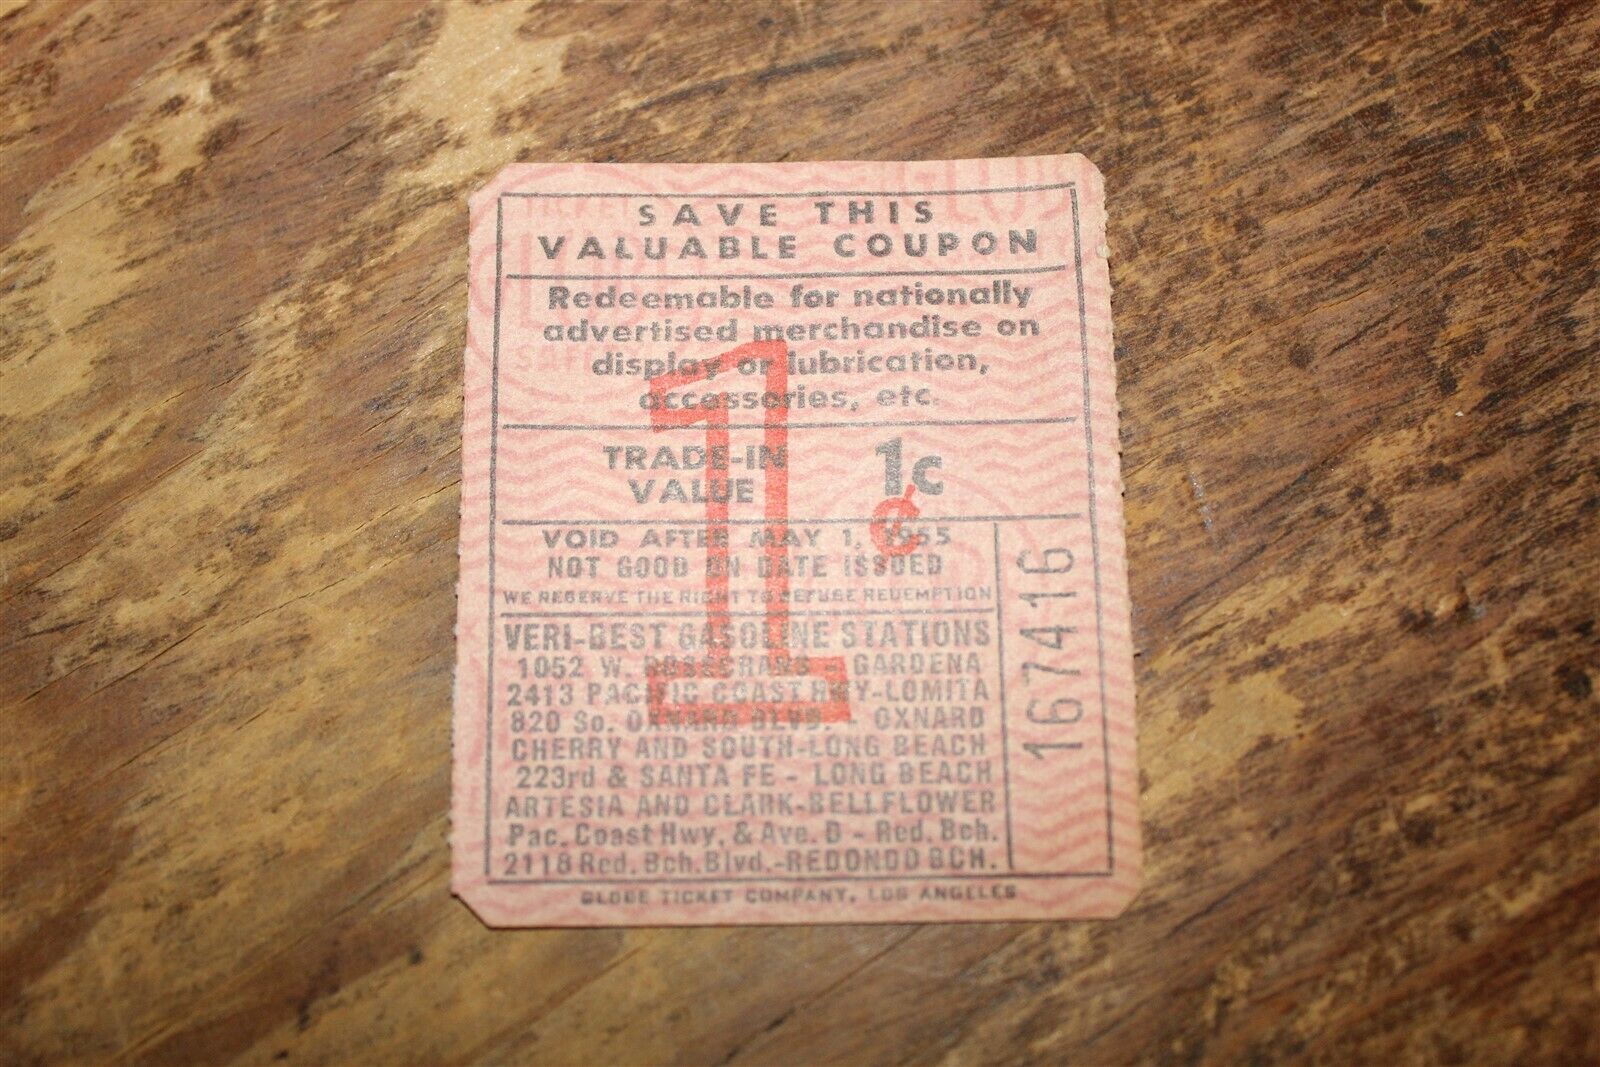 VERI-BEST GASOLINE STATIONS - 1 CENT COUPON 1955 RED